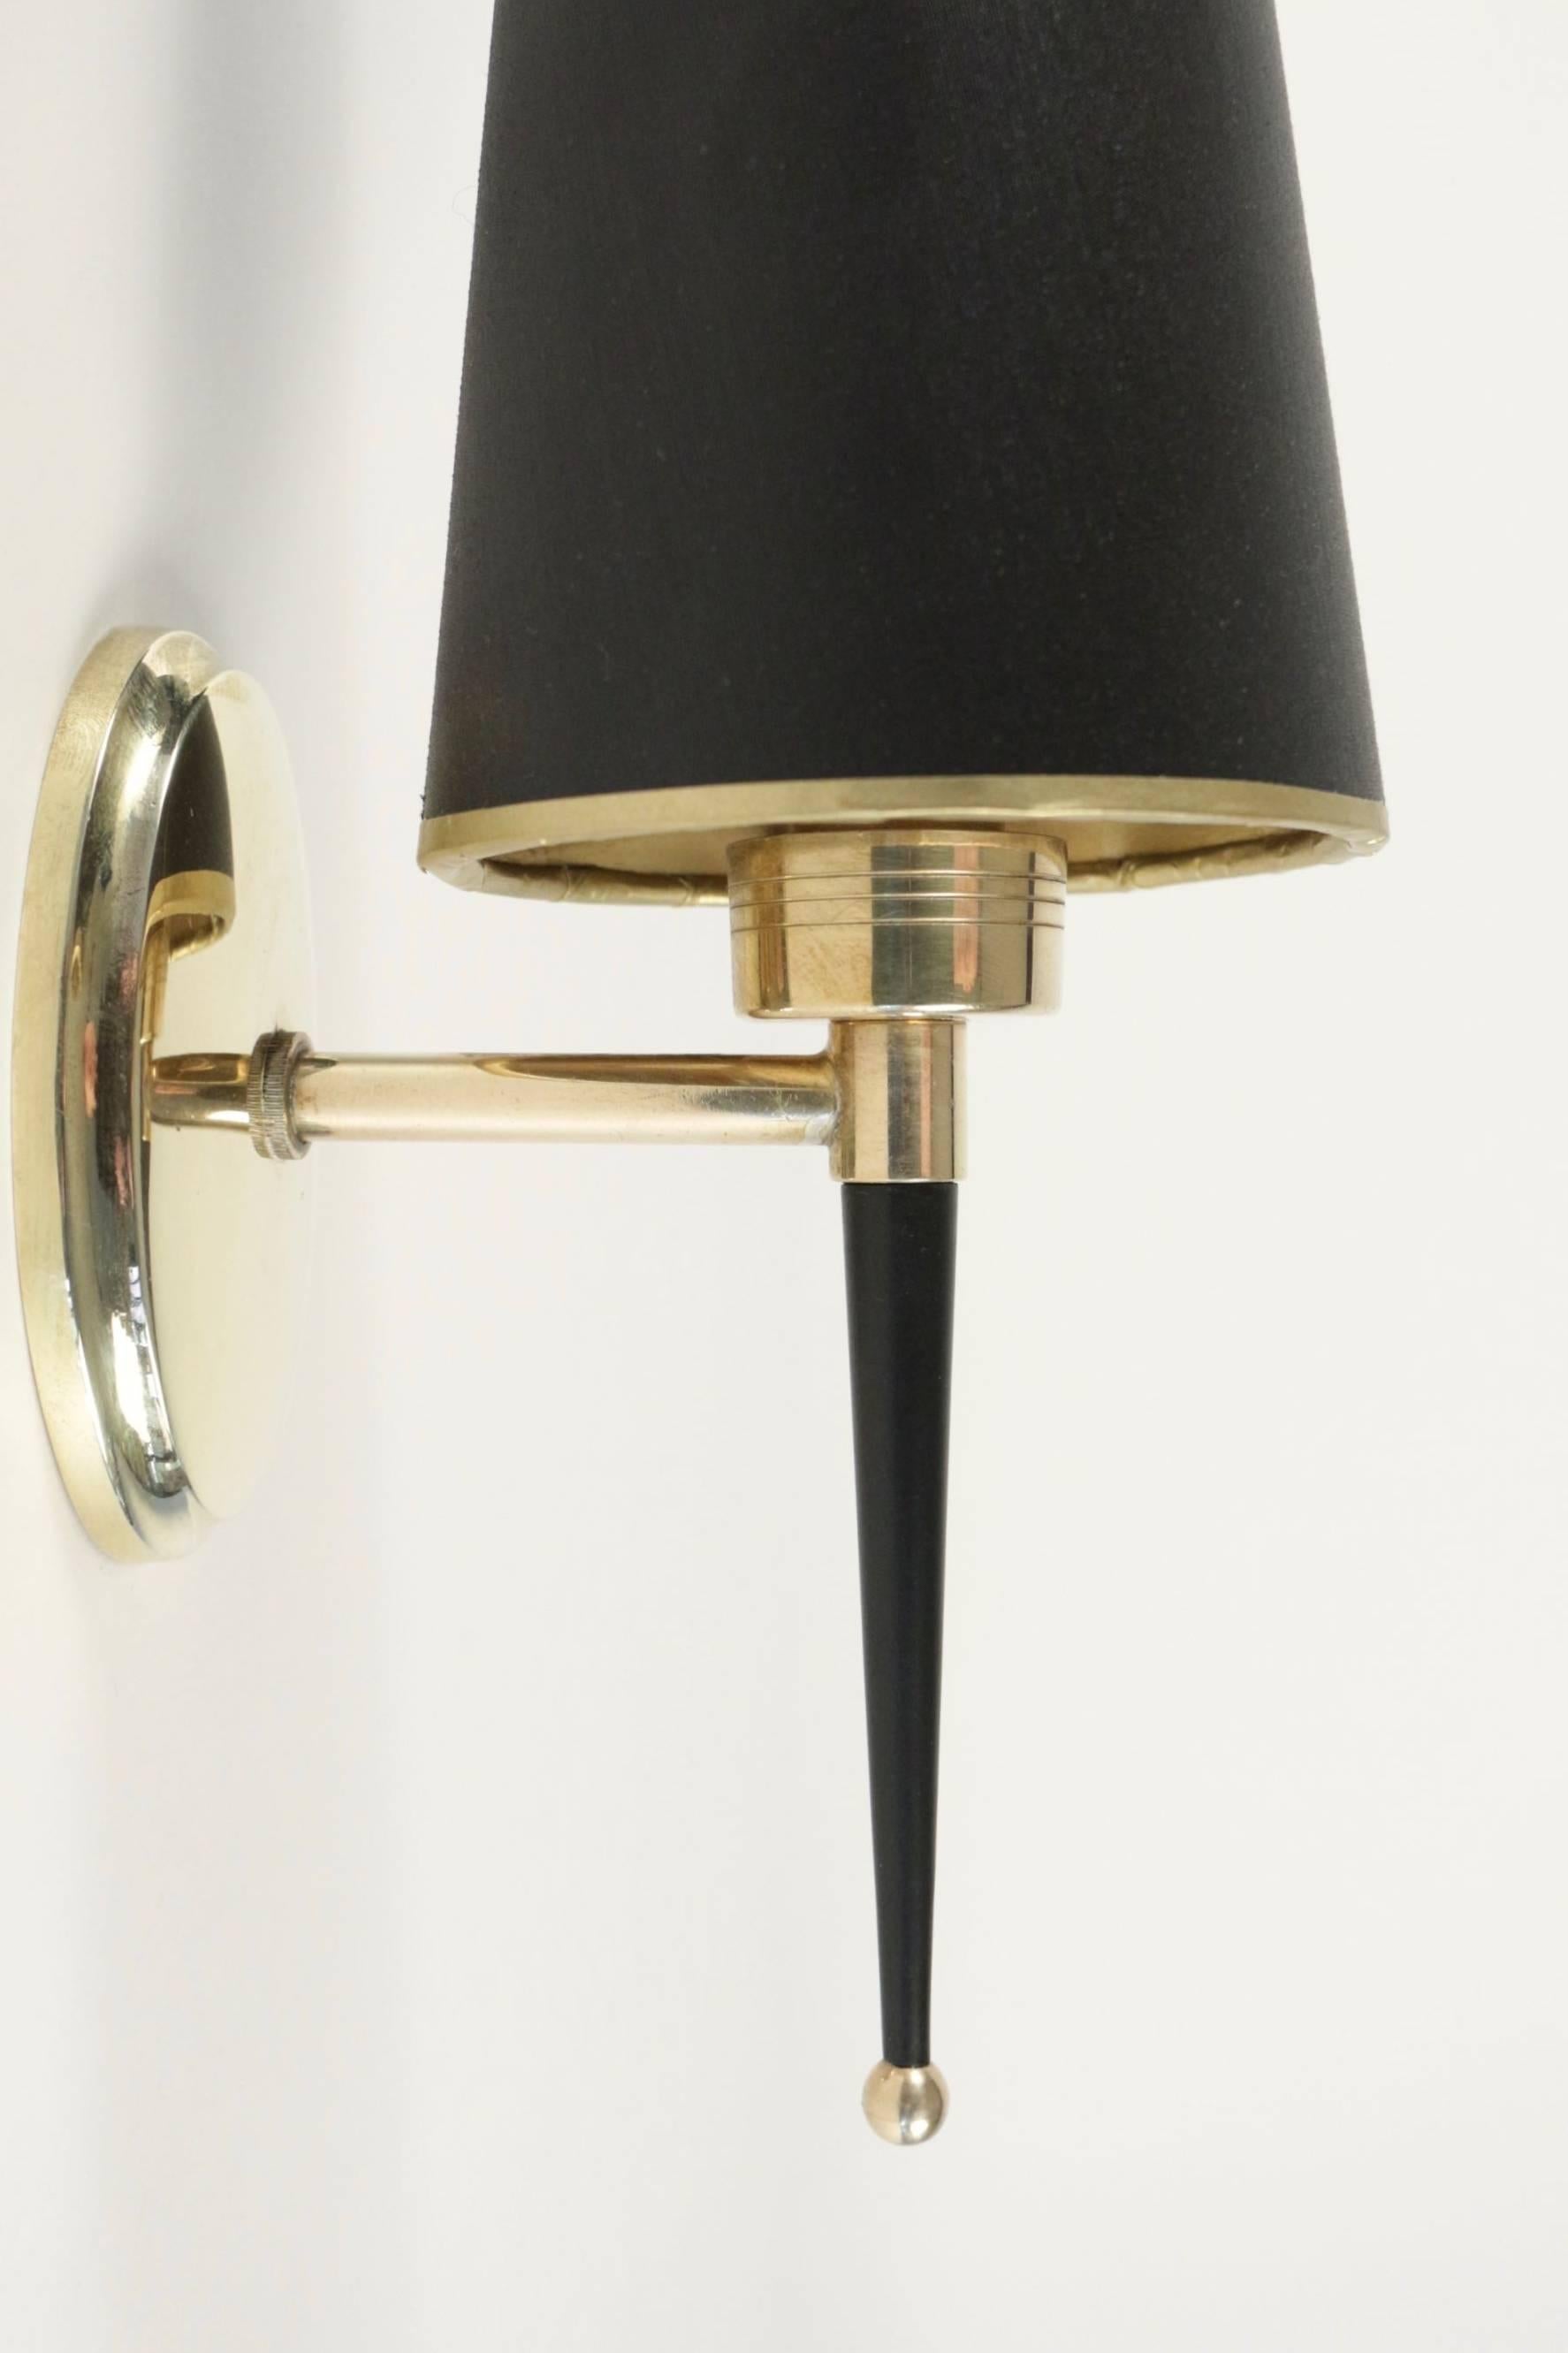 1950 pair of Lunel sconces.

The oval backplate is made of brass and supports one lighted arm with a black lacquered steel ended with a brass ball.
Handmade lampshade made of black cotton with a gold inner face.

One bulb per sconce.
  